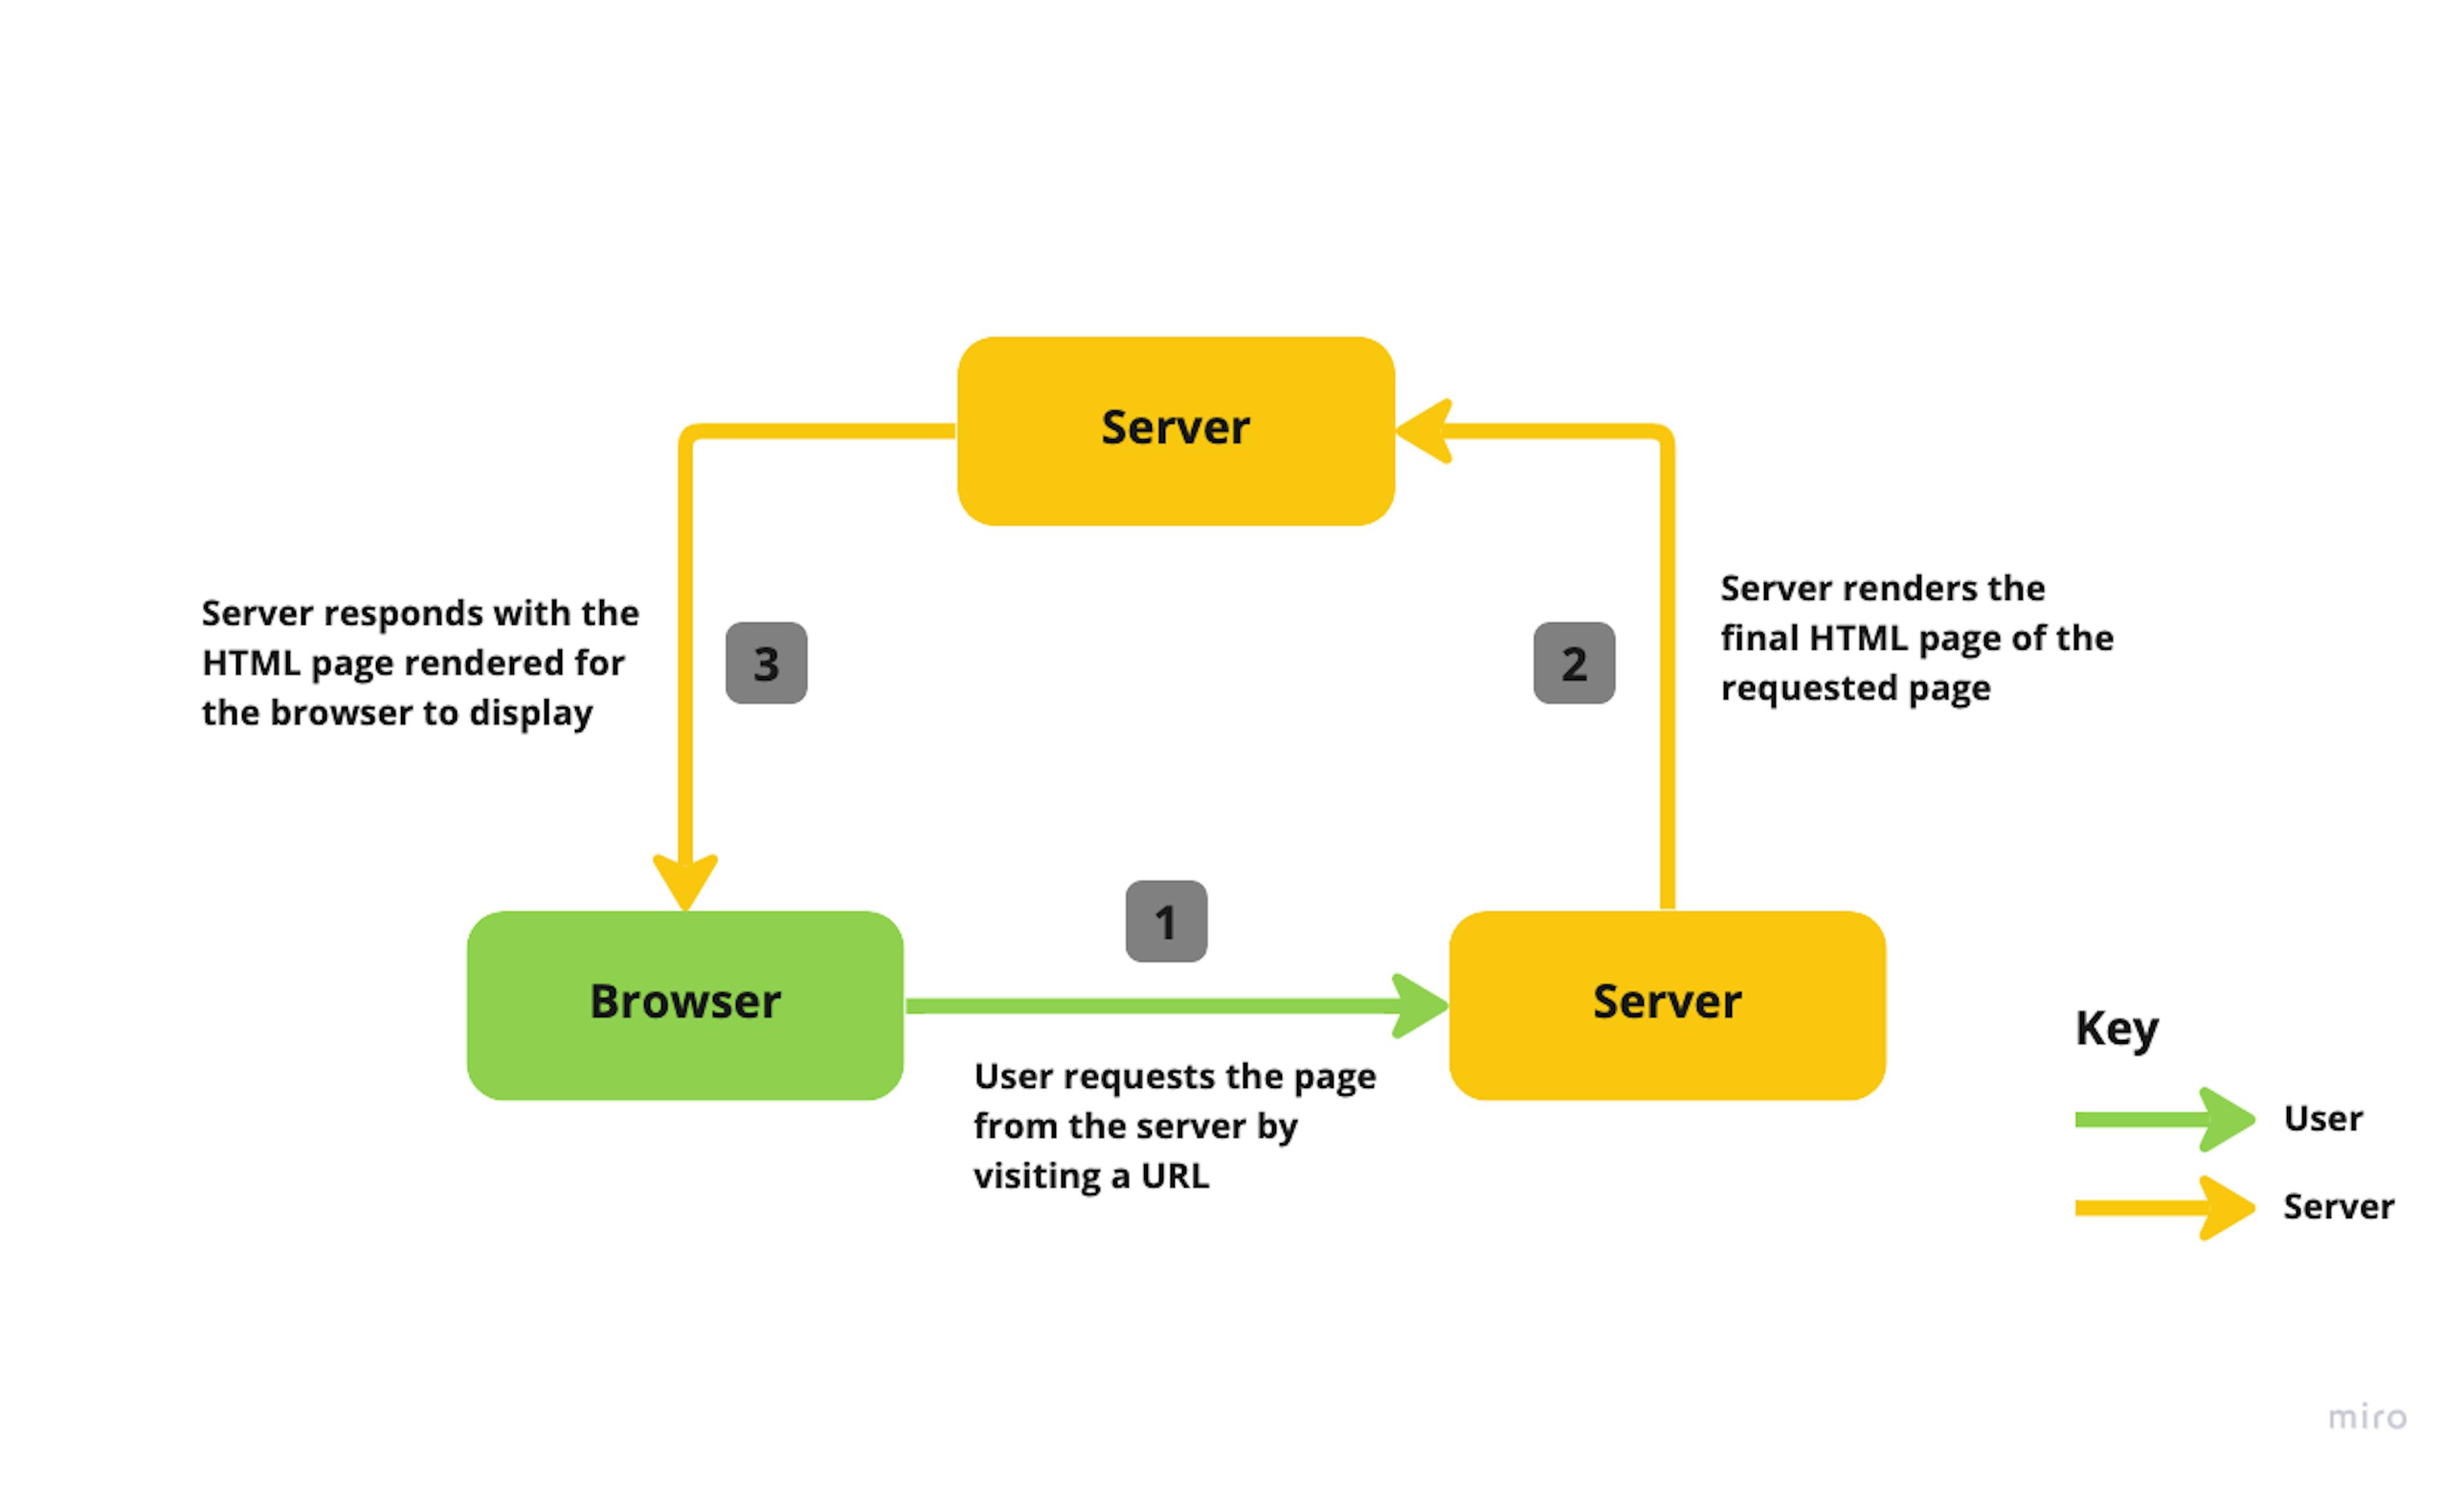 A diagram showing how in server-side rendering a browser requests a page, and upon receiving the request, the server renders the final HTML, etc. before sending it back to the browser.